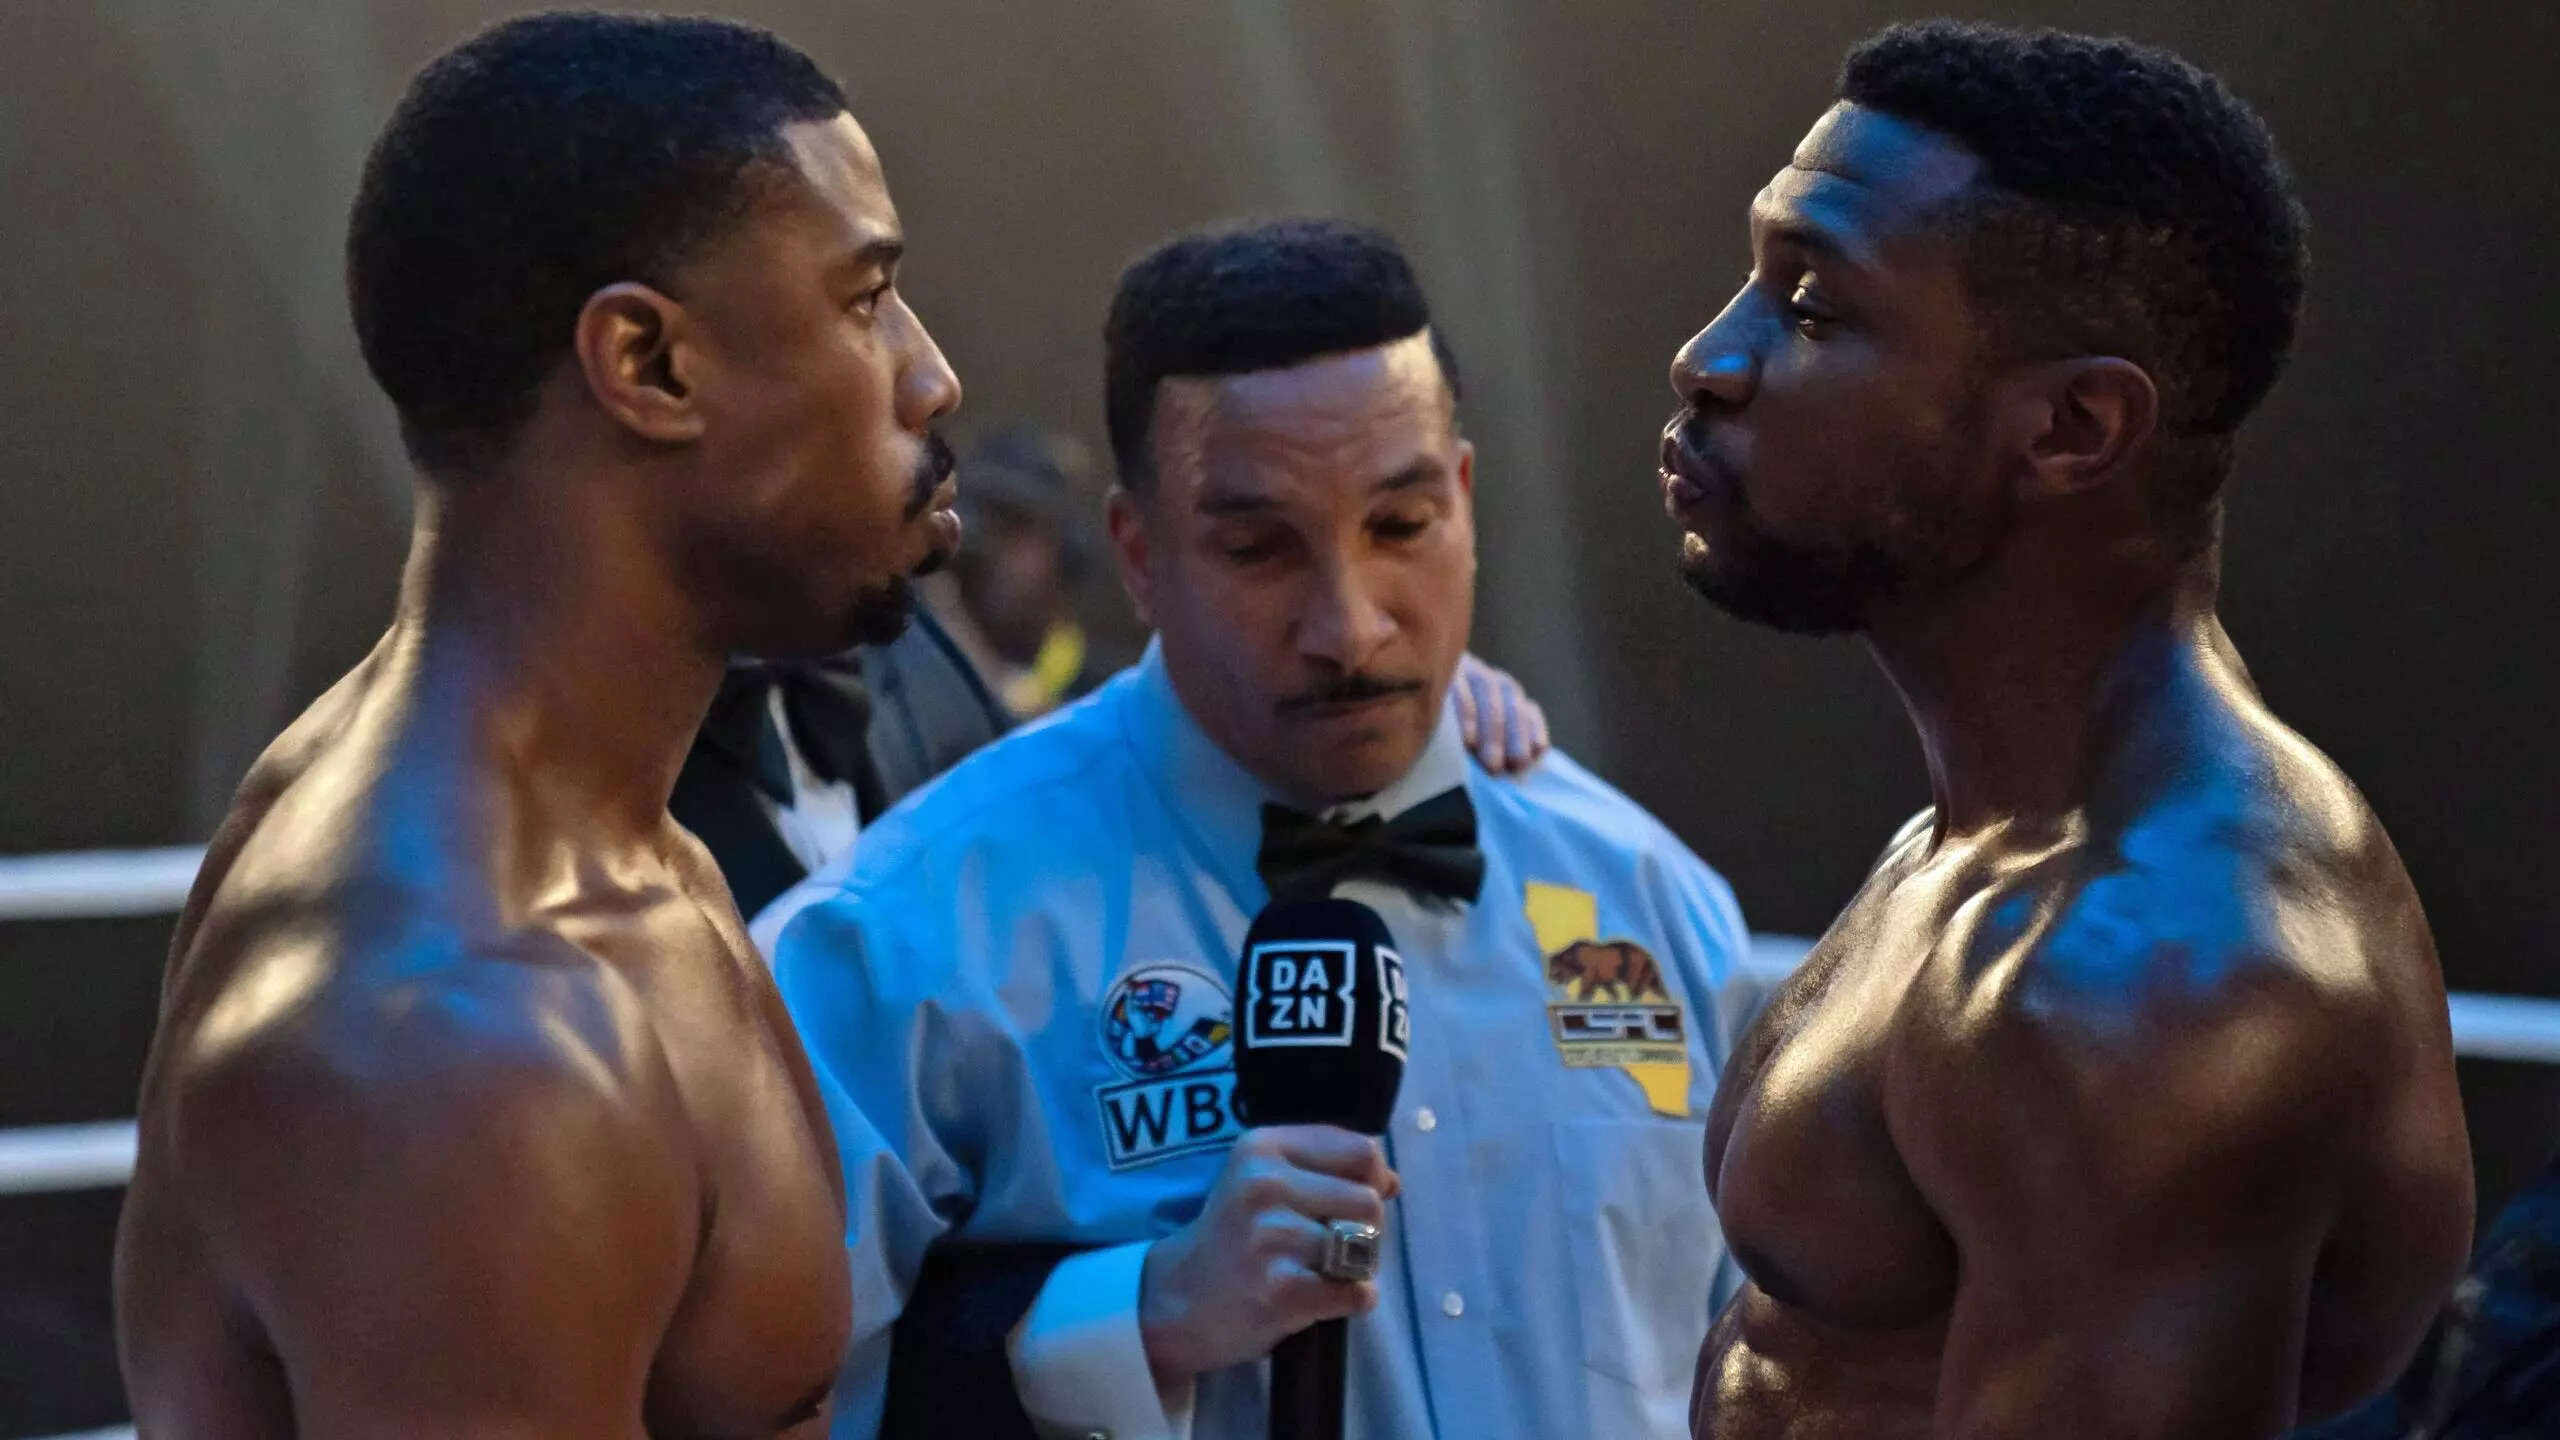 Michael B. Jordan and Jonathan Majors looking at each other inside a boxing ring